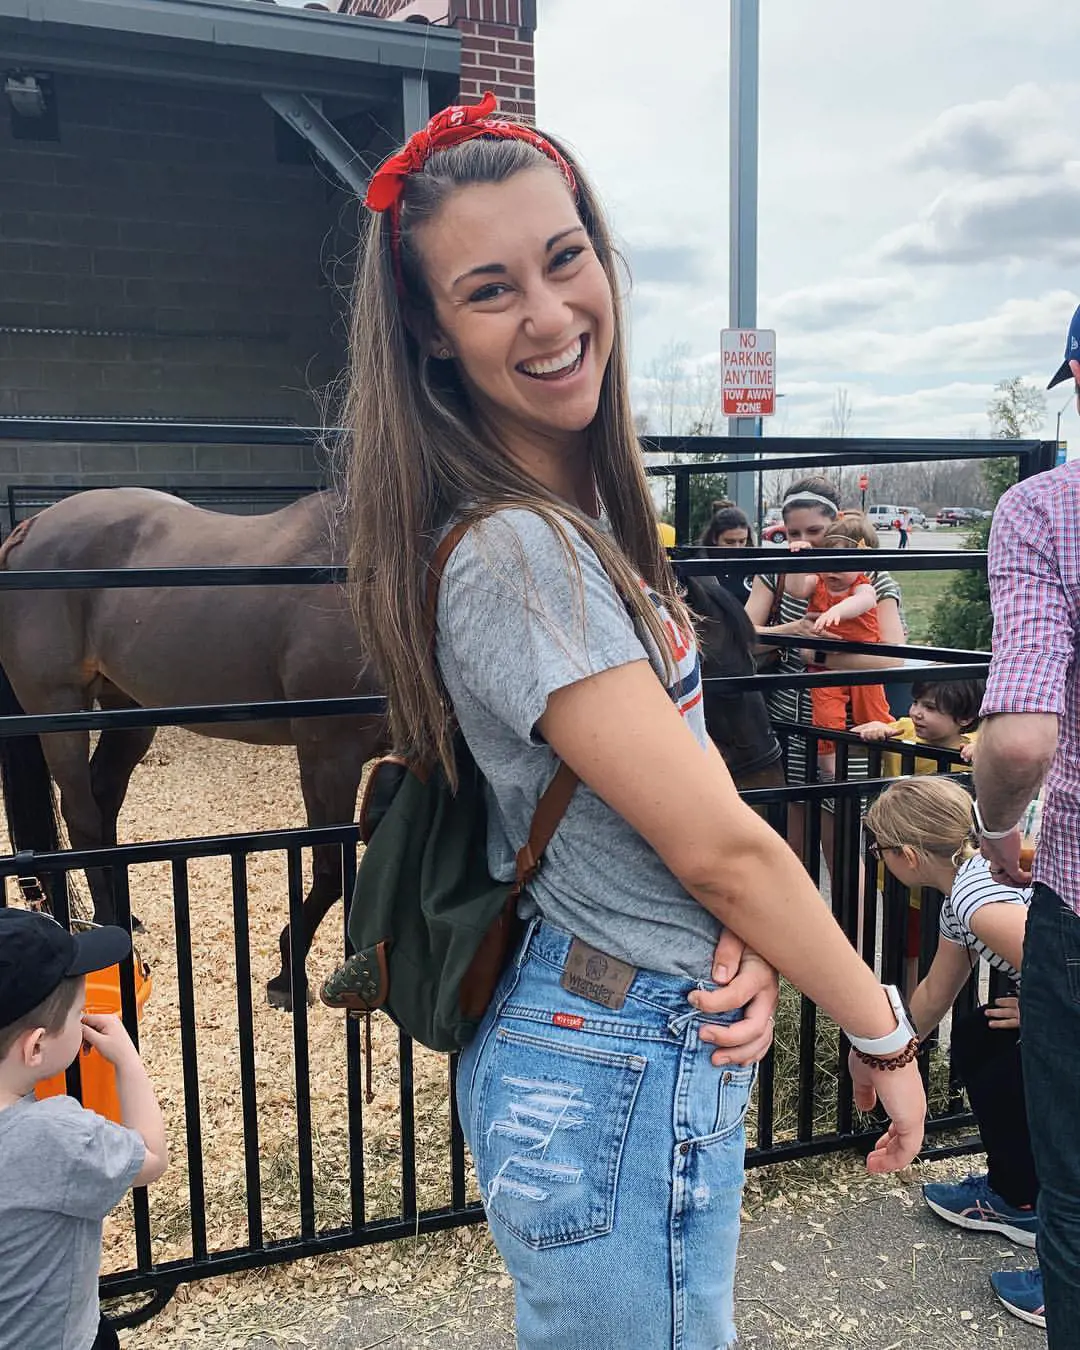 Jael enjoying her time at Old Town Road Dairy in 2019.